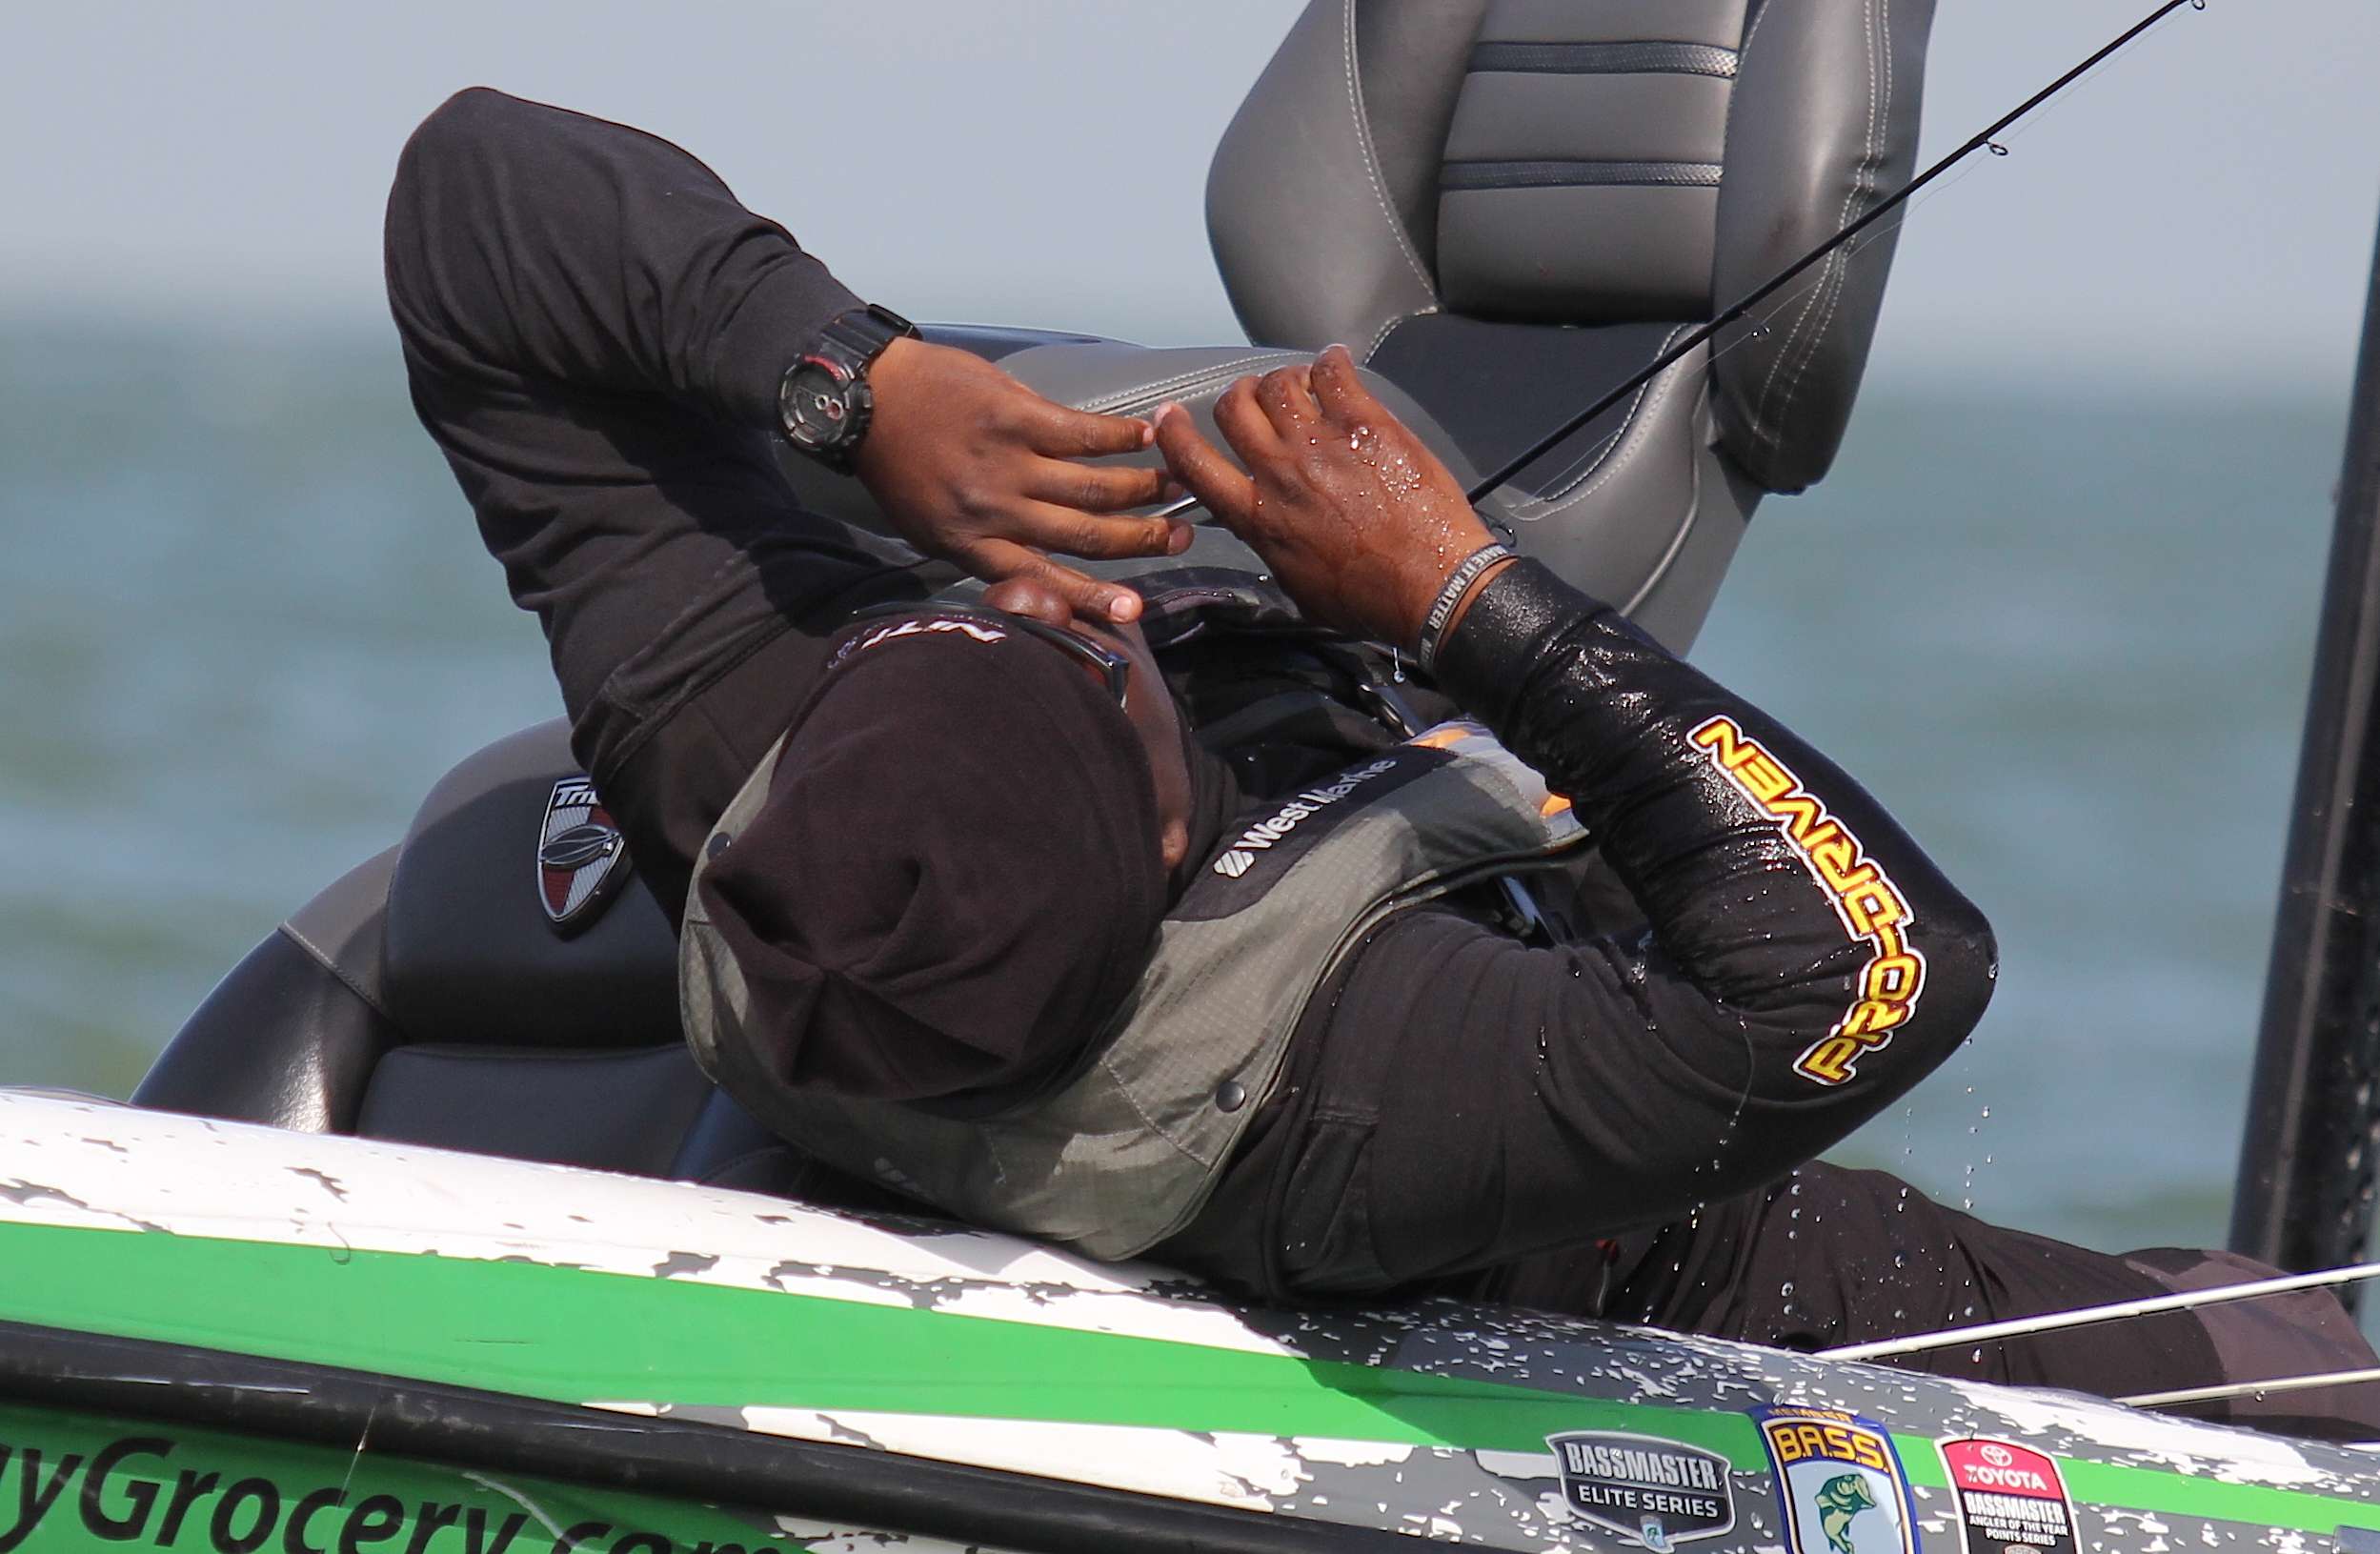 After watching Remitz boat 18 pounds and then missing an opportunity at a big one of his own, his misery is palpable.